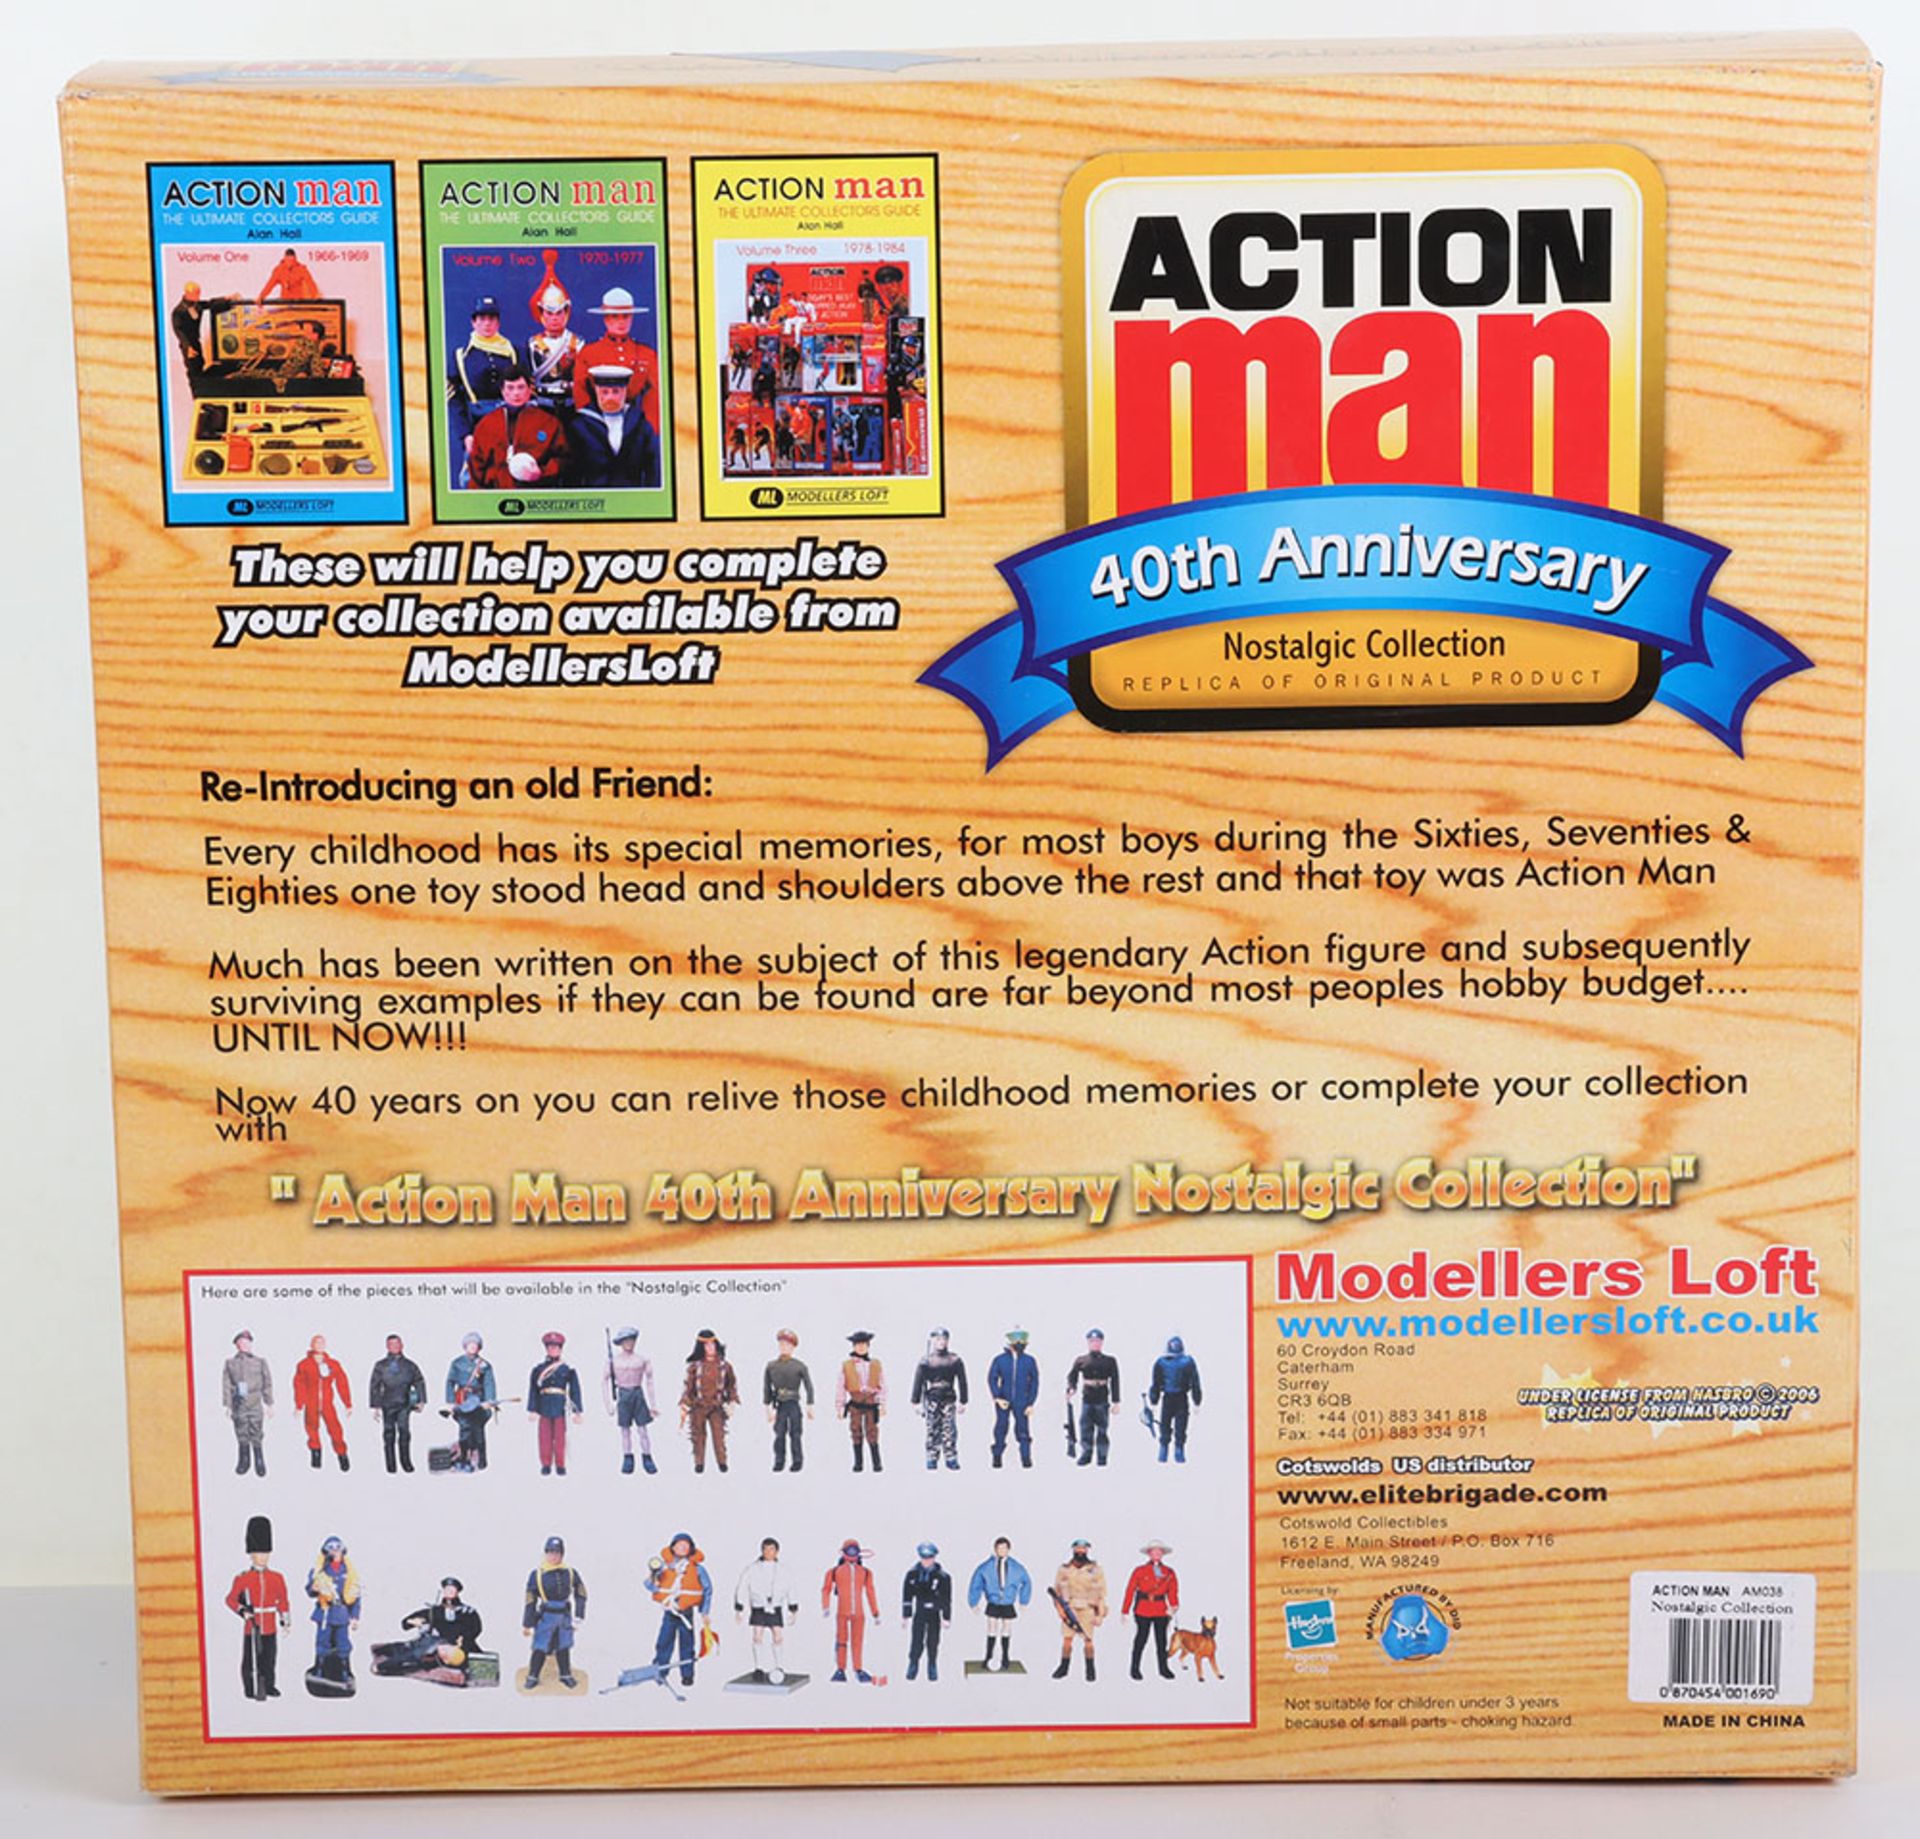 Action Man Palitoy ‘Red Devil’ Parachutist Set 40th Anniversary Nostalgic Collection - Image 2 of 2